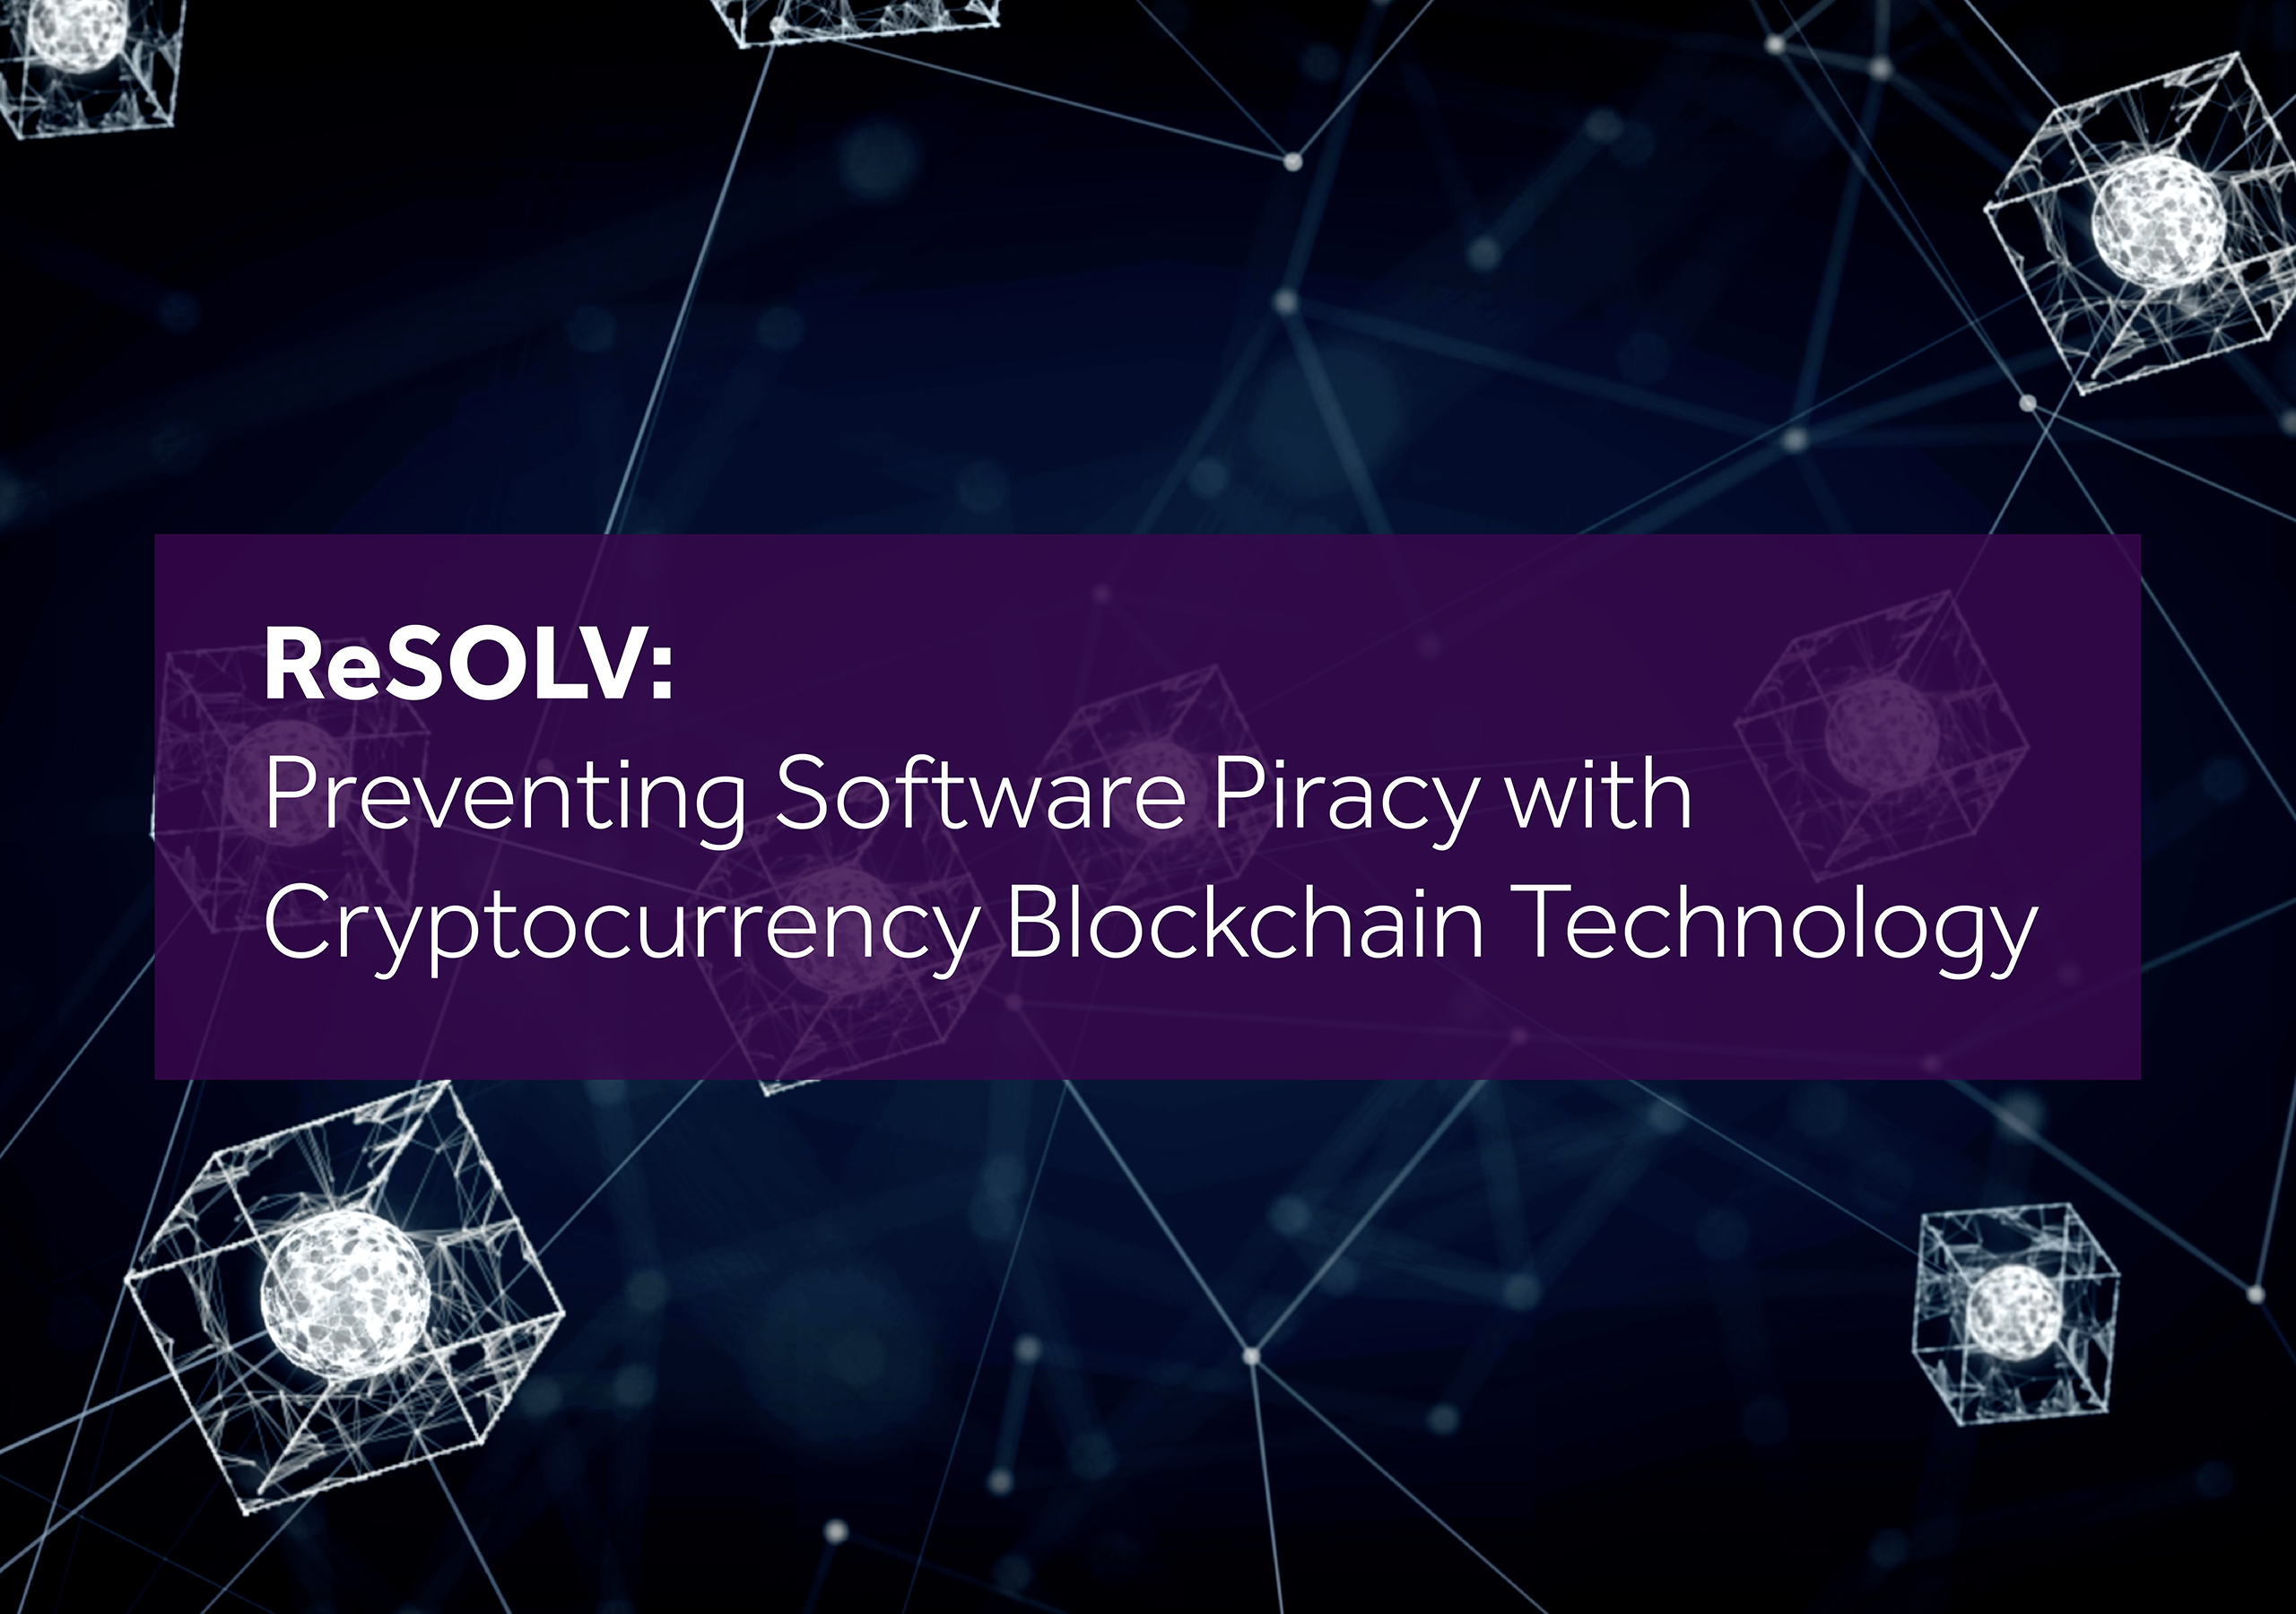 Dr Alan Litchfield | Jeff Herbert – ReSOLV: Preventing Software Piracy with Cryptocurrency Blockchain Technology